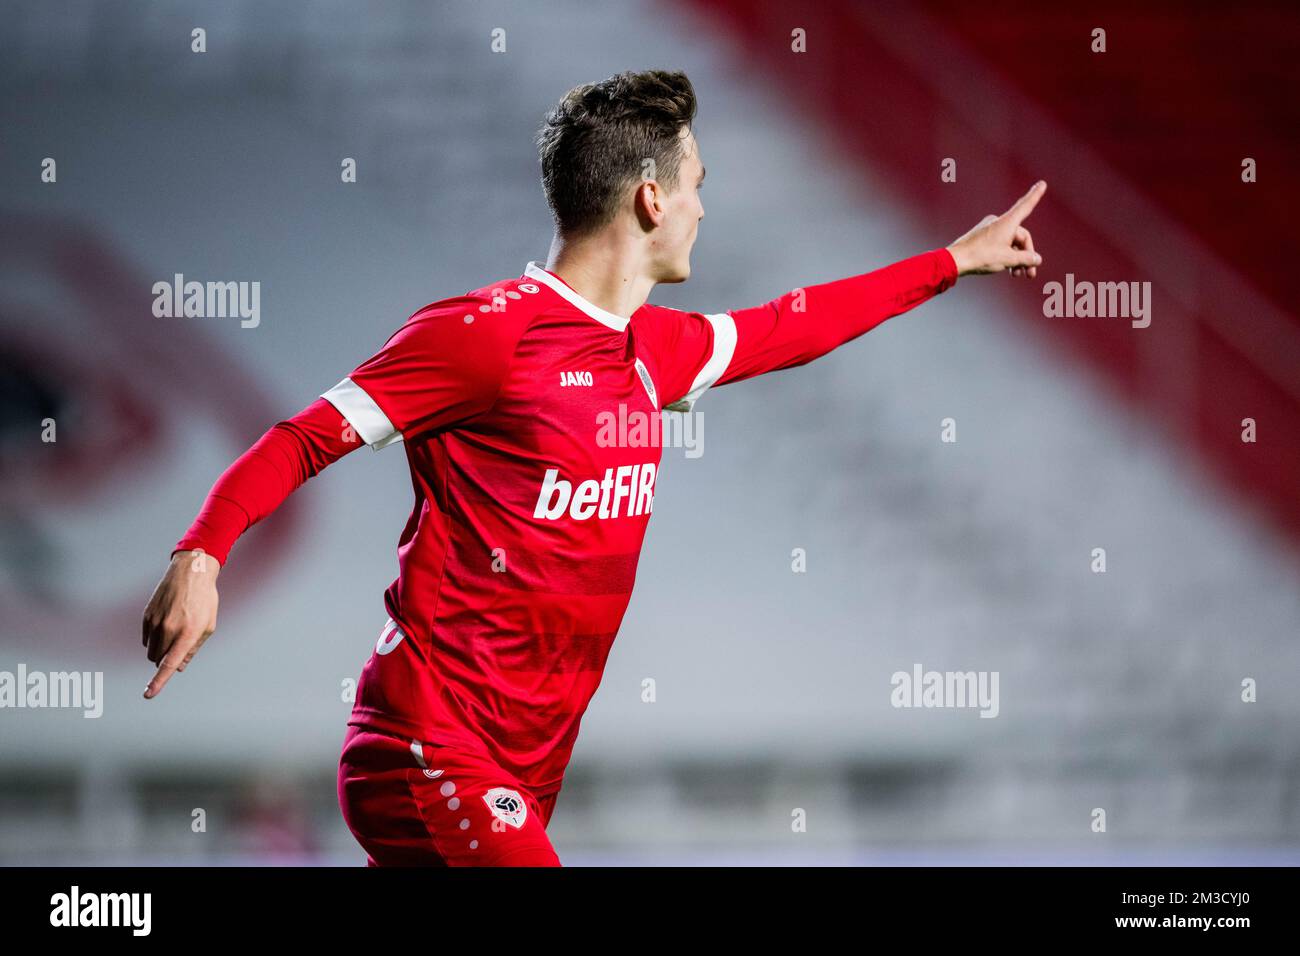 Antwerp's Pieter Gerkens celebrates after scoring during a soccer match between Royal Antwerp FC RAFC and Sint-Truiden STVV, Friday 07 October 2022 in Antwerp, a match on day 11 of the 2022-2023 'Jupiler Pro League' first division of the Belgian championship. BELGA PHOTO JASPER JACOBS Stock Photo